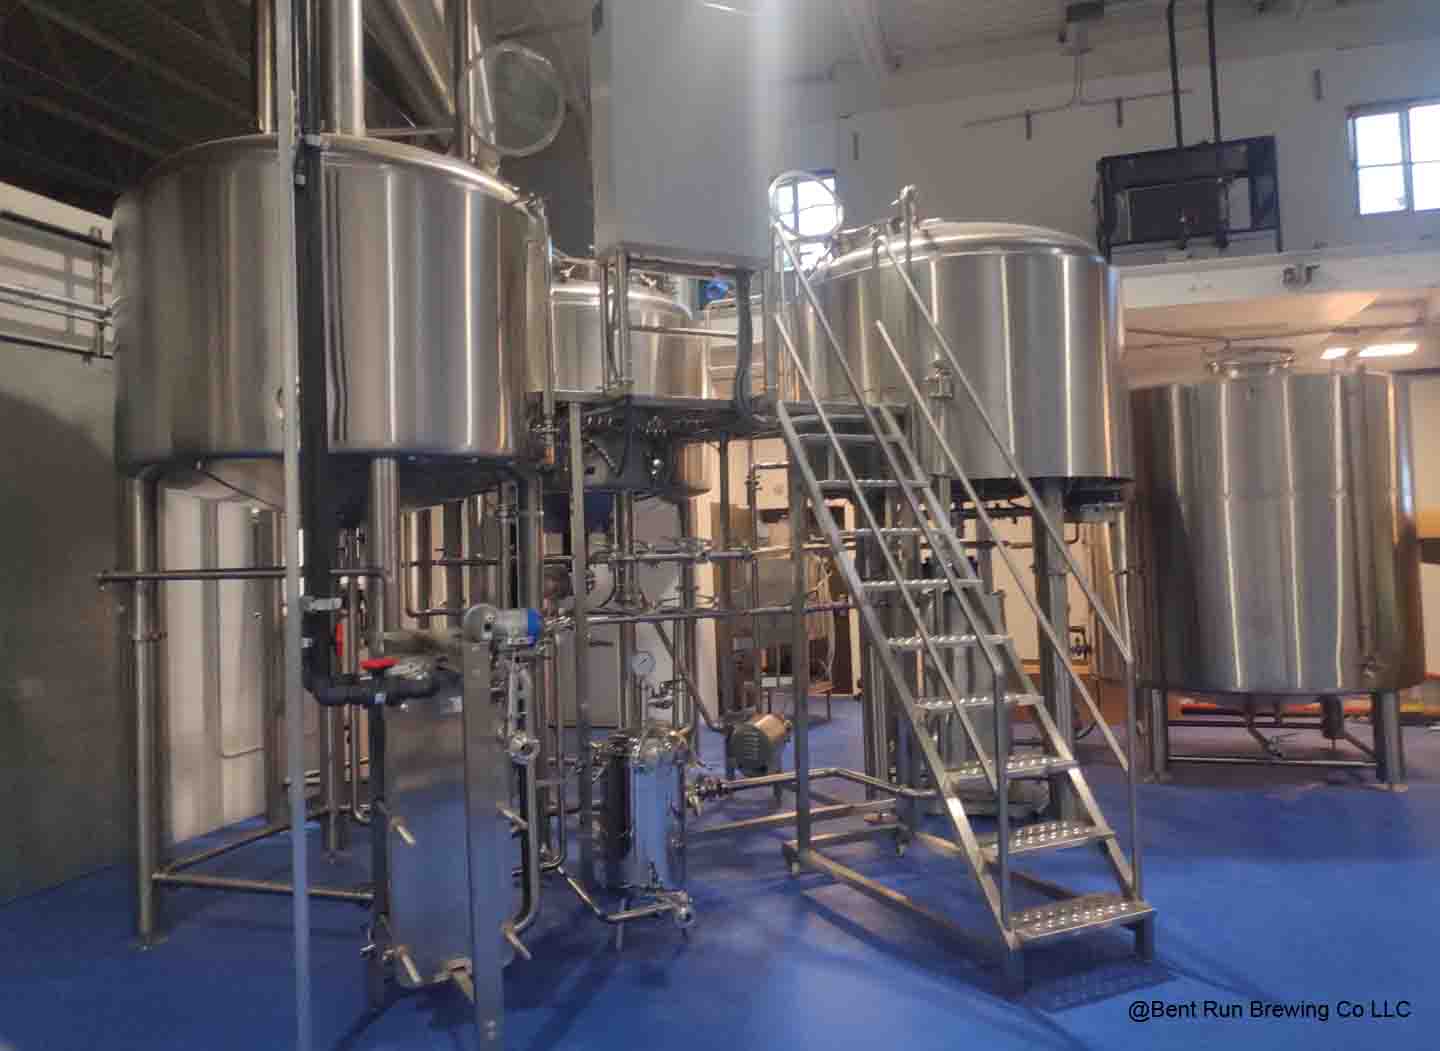 <b>Do I need hopback for my beer brewery equipment?</b>